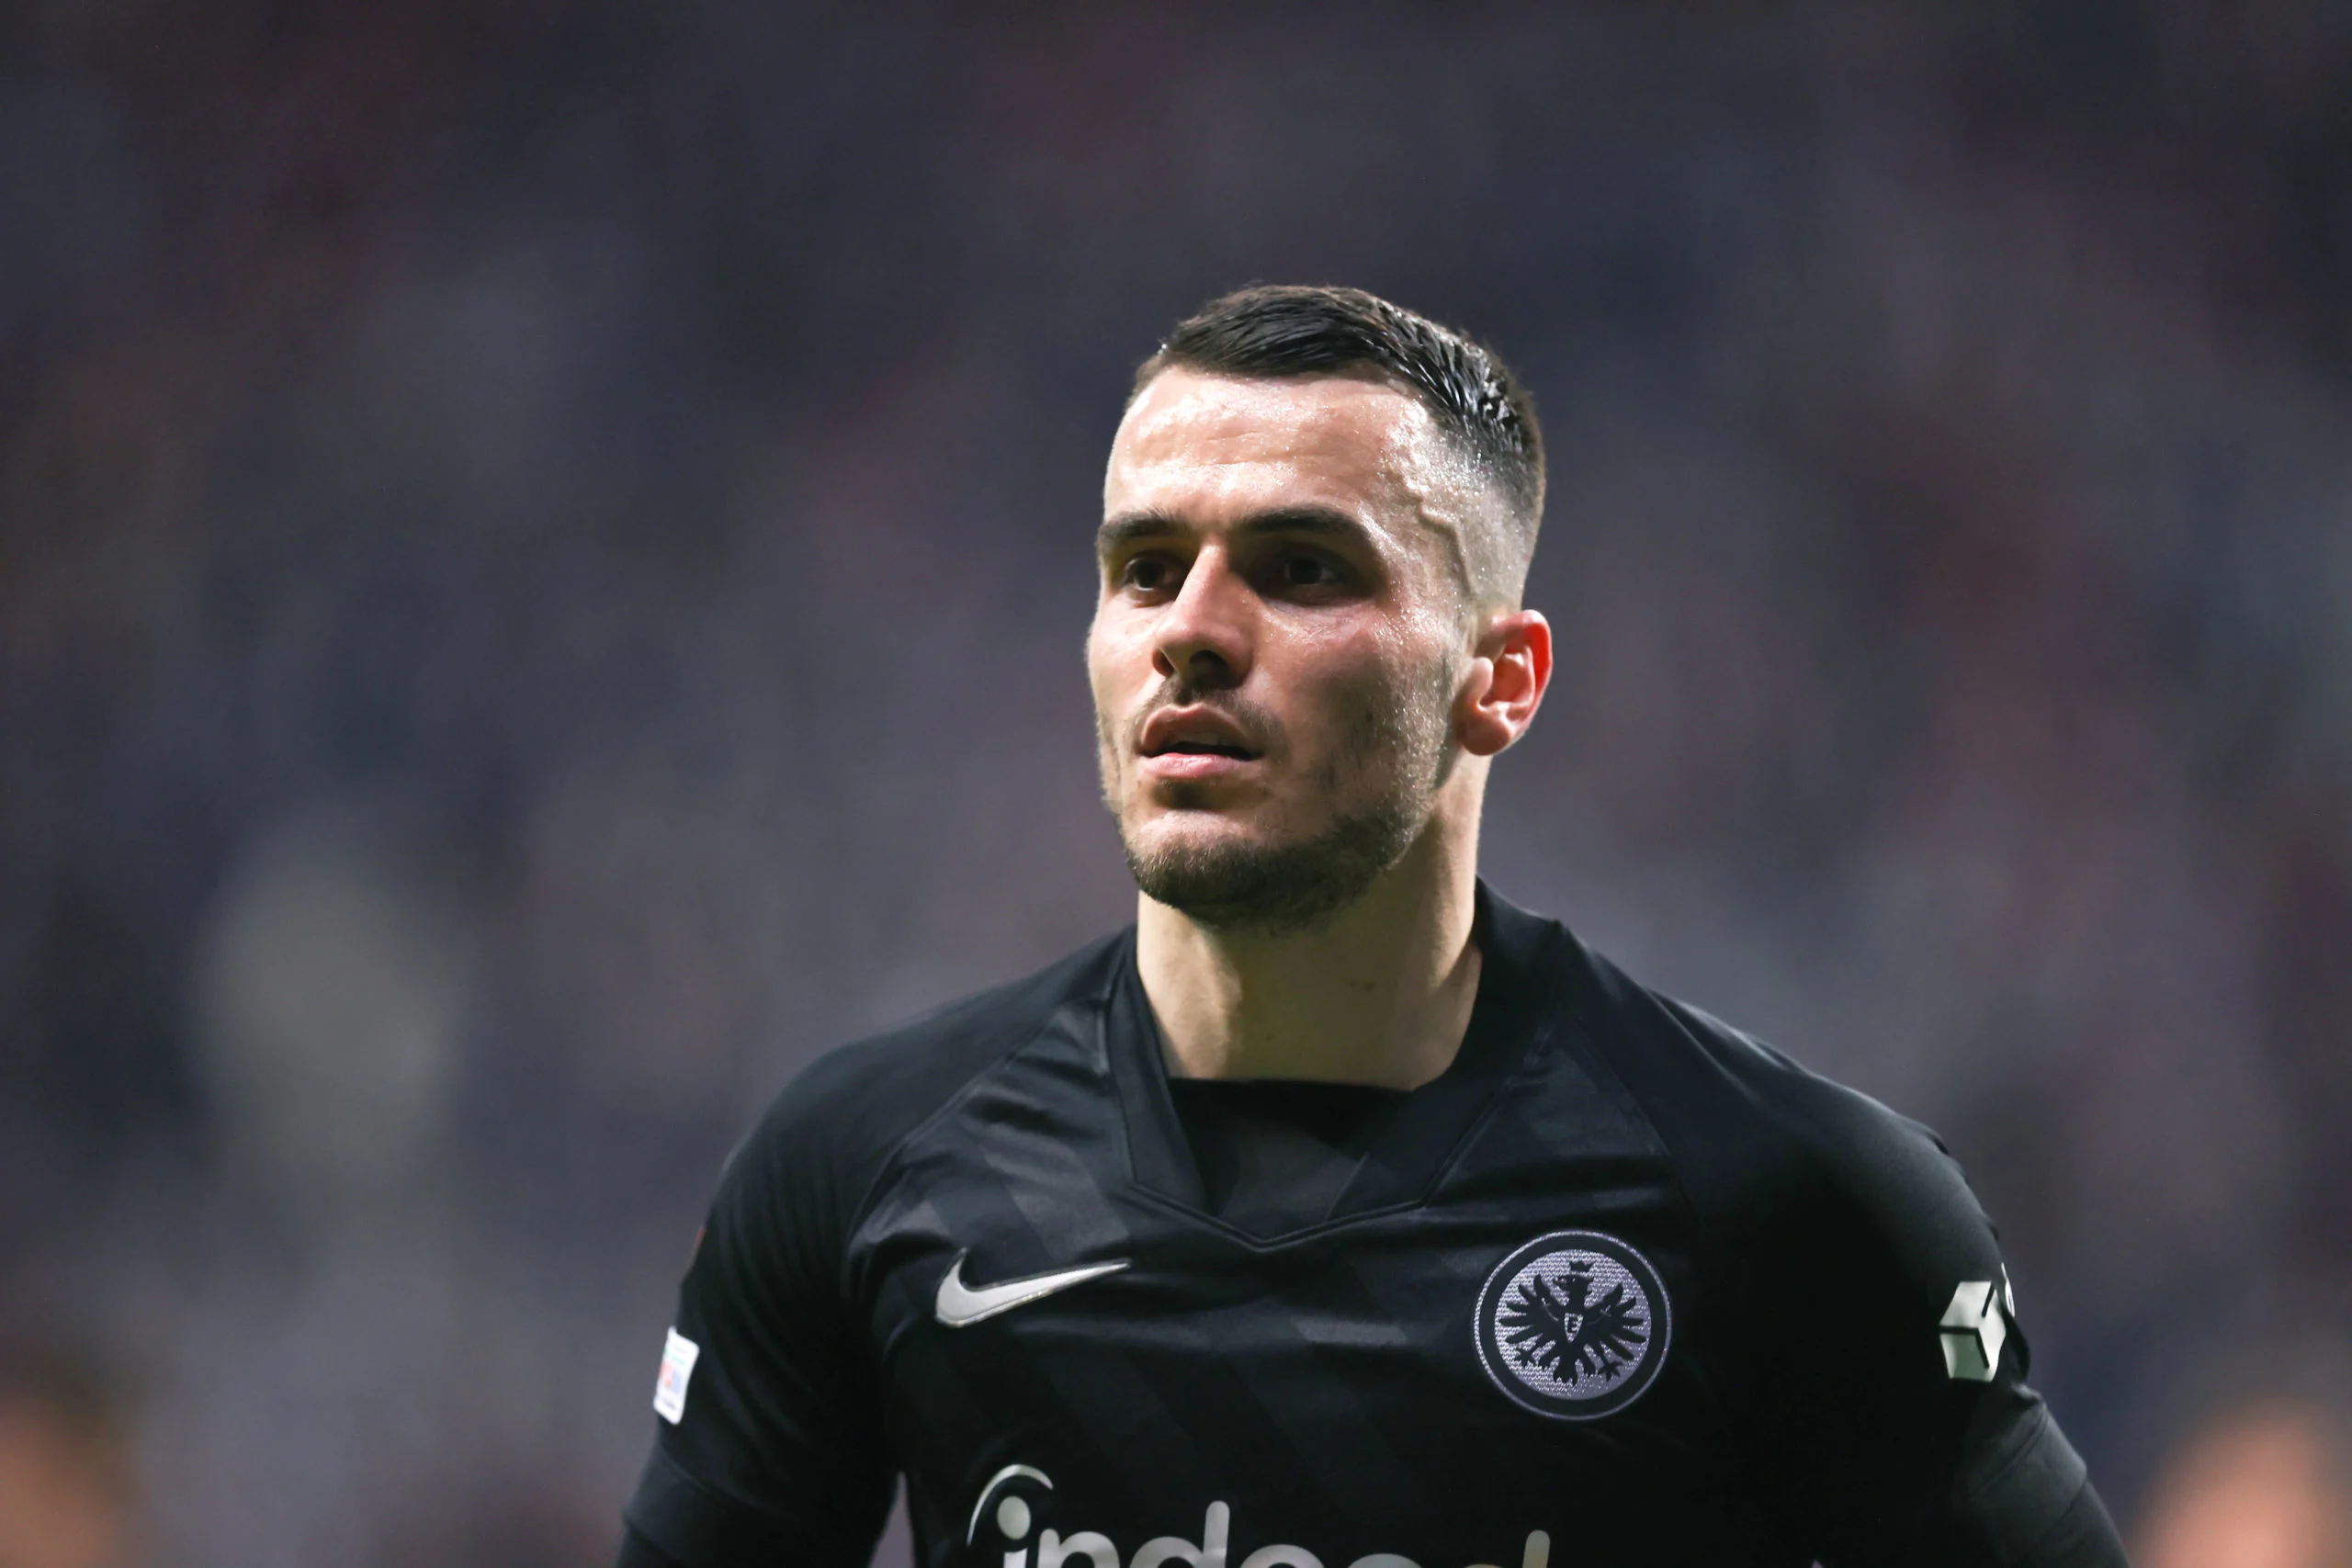 Frankfurt ace Kostic is closer to moving to West Ham than Juventus, with the Premier League side preparing an initial €15M bid to onboard him.